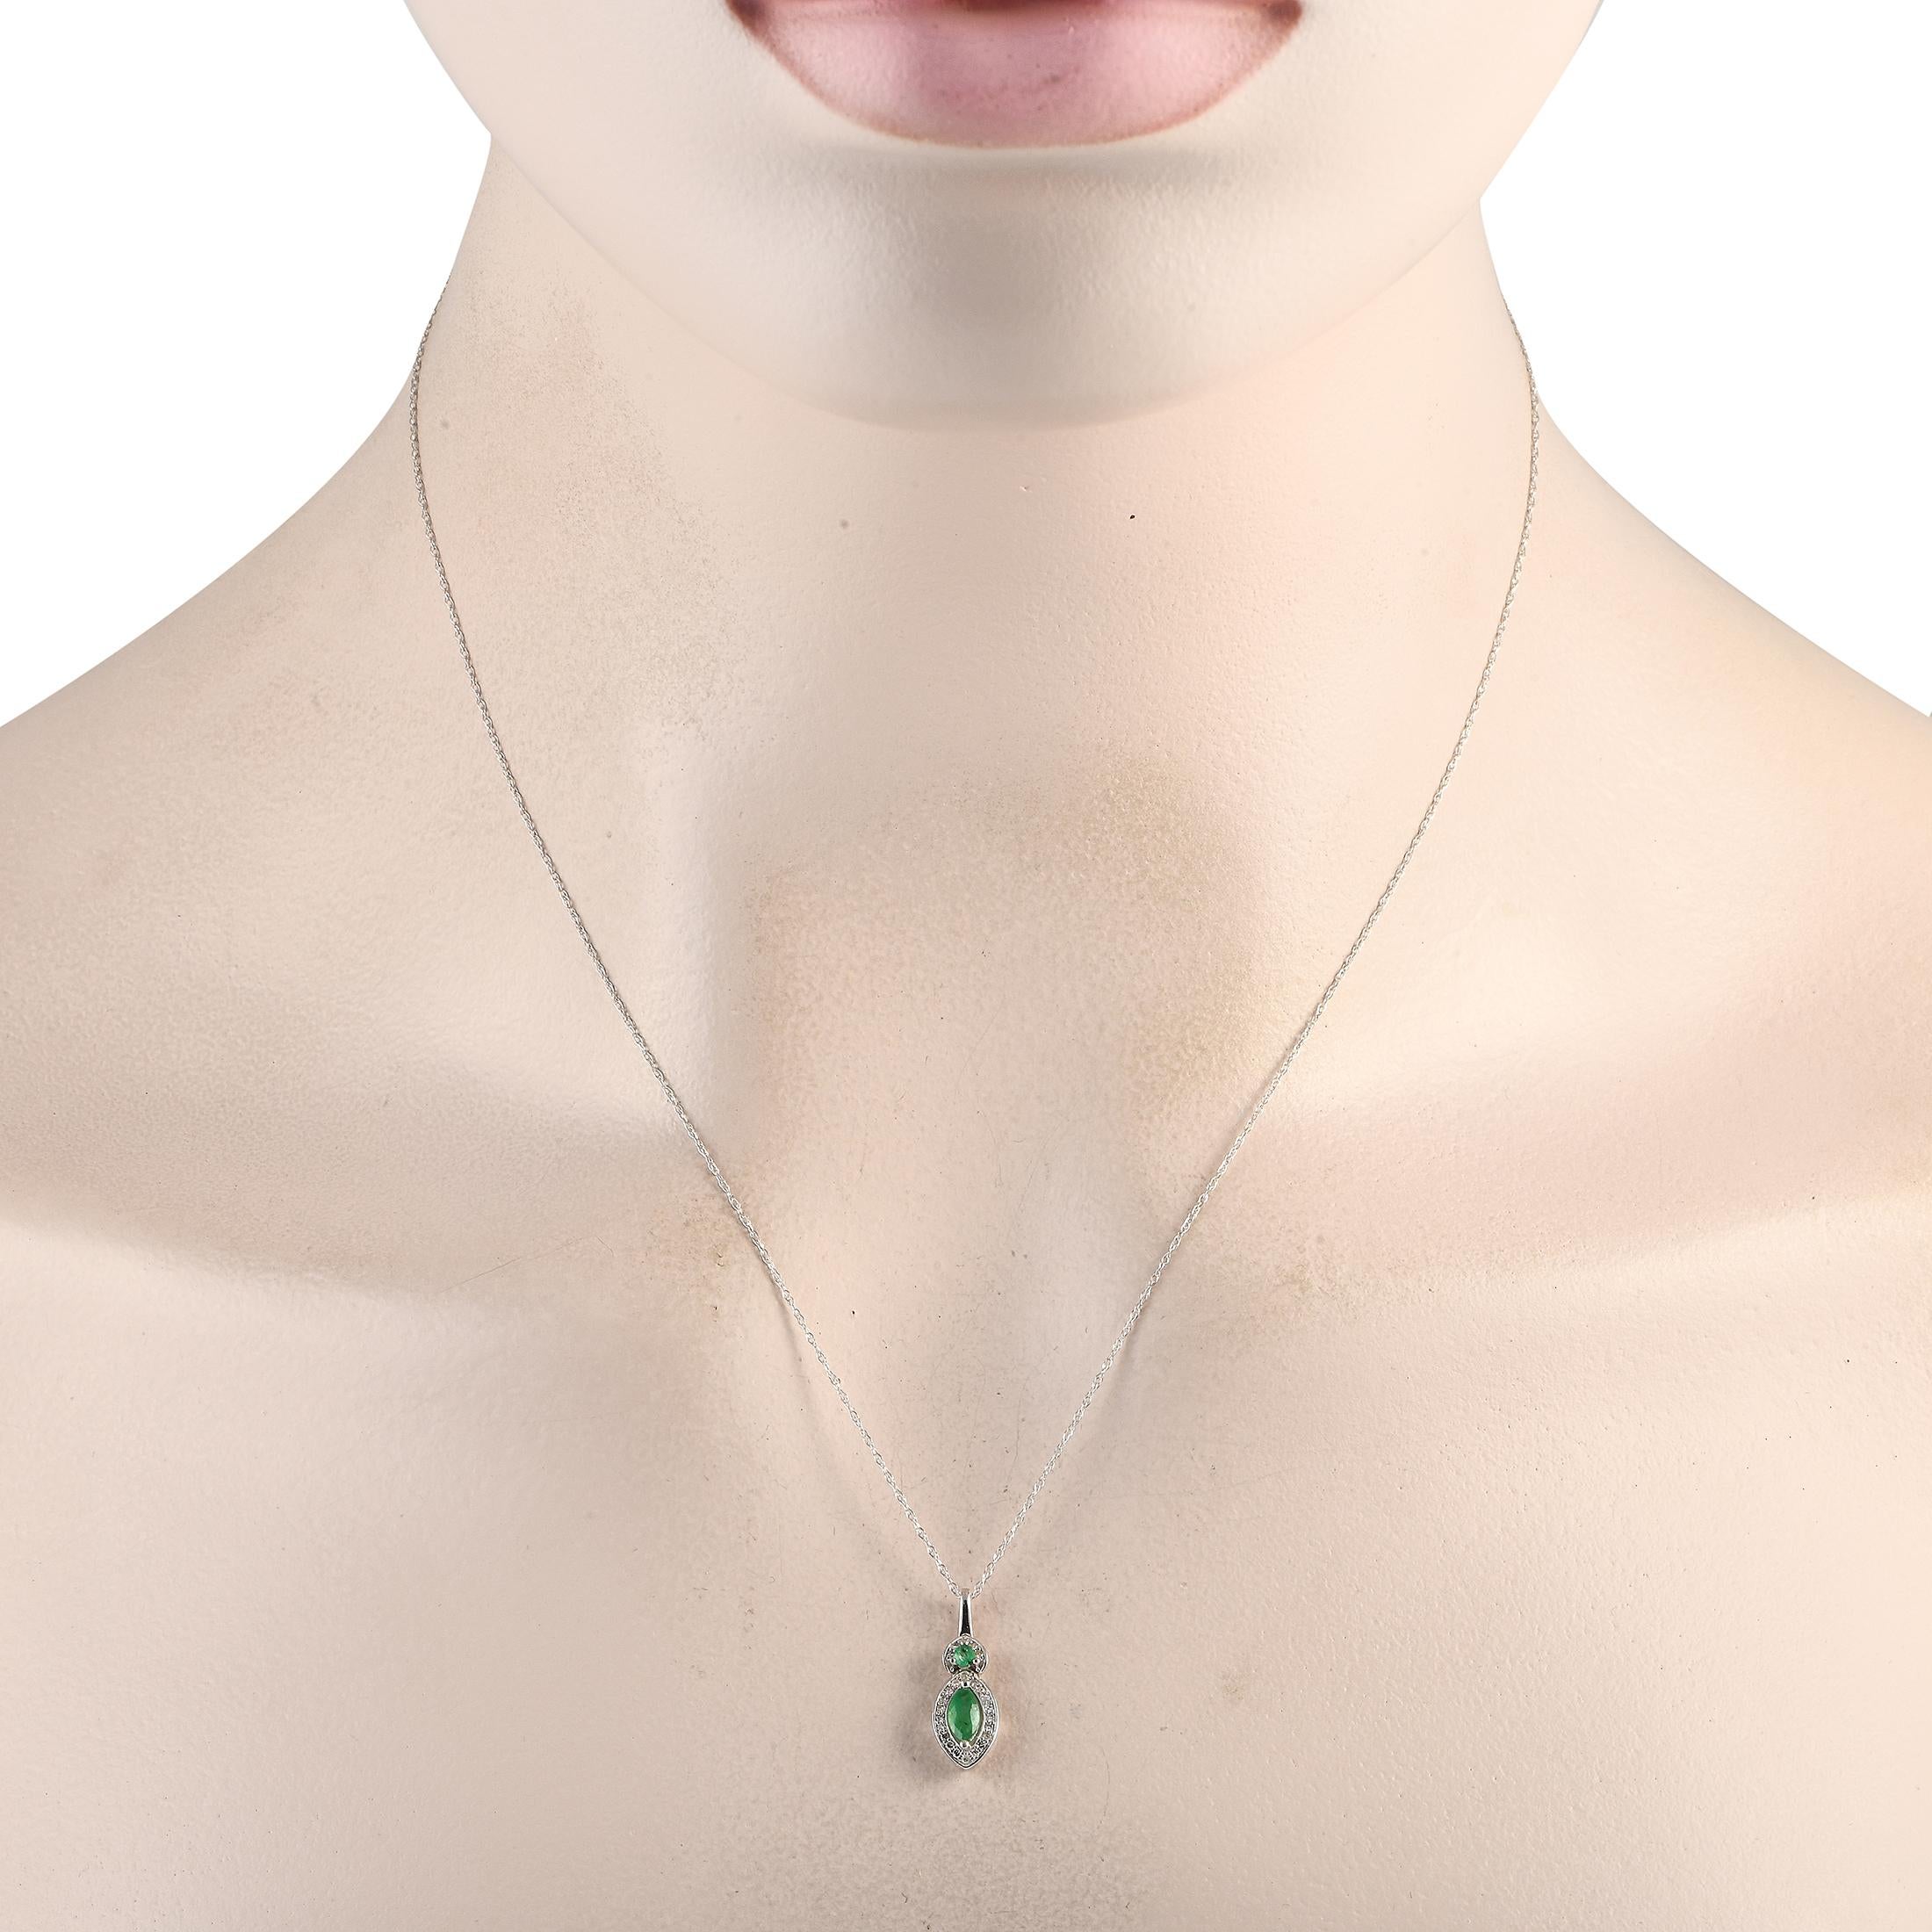 This timeless necklace will add the perfect pop of color to any ensemble. Suspended from an 18 chain, youll find a sophisticated pendant measuring 0.75 long and 0.25 wide. It comes to life thanks to eye-catching Emerald gemstones and Diamond accents